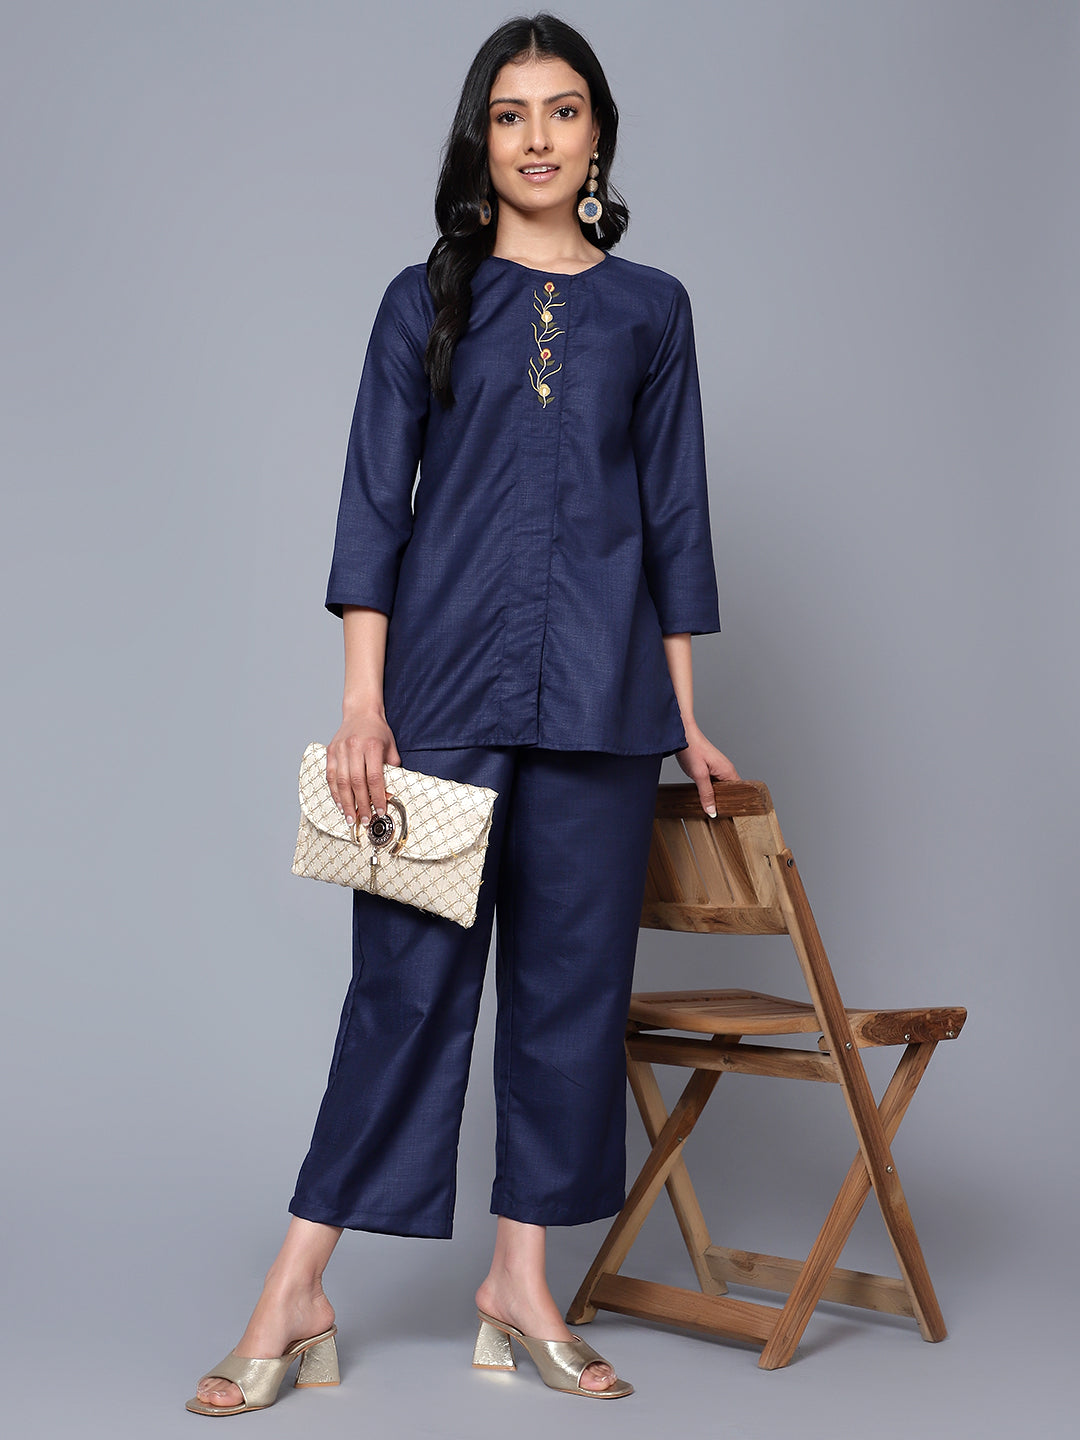 Womens Co-Ord Set Navy Blue